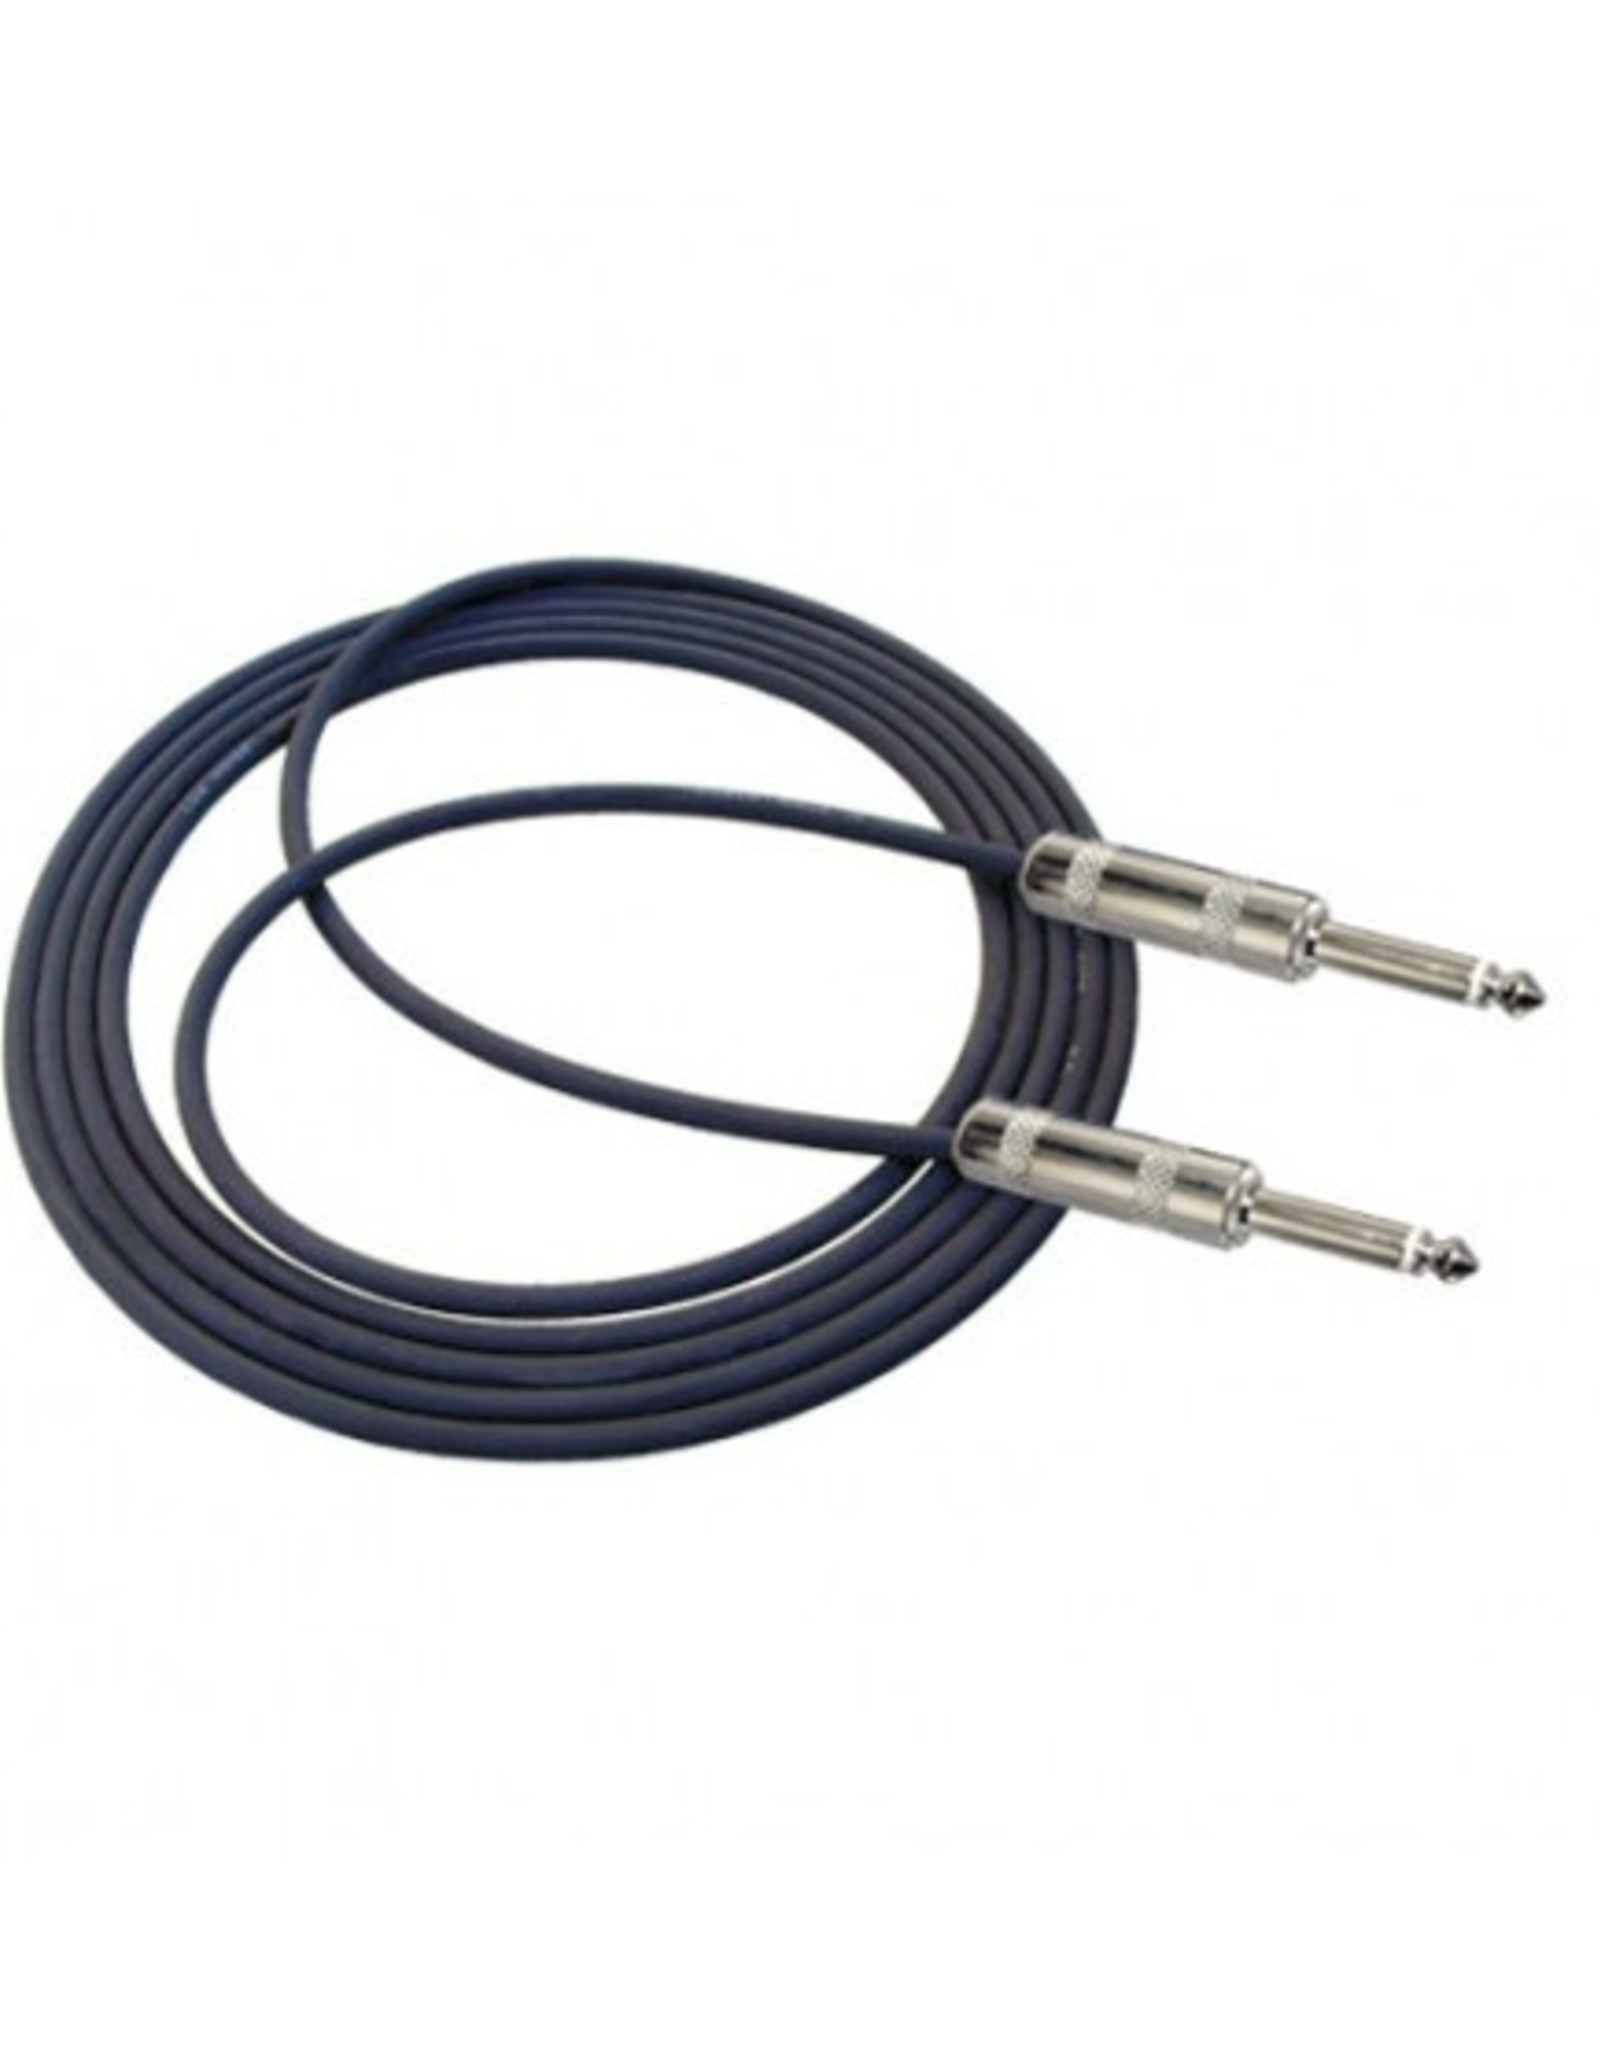 Rapco 1/4" to 1/4" Speaker Cable 3 Ft 16 Gauge